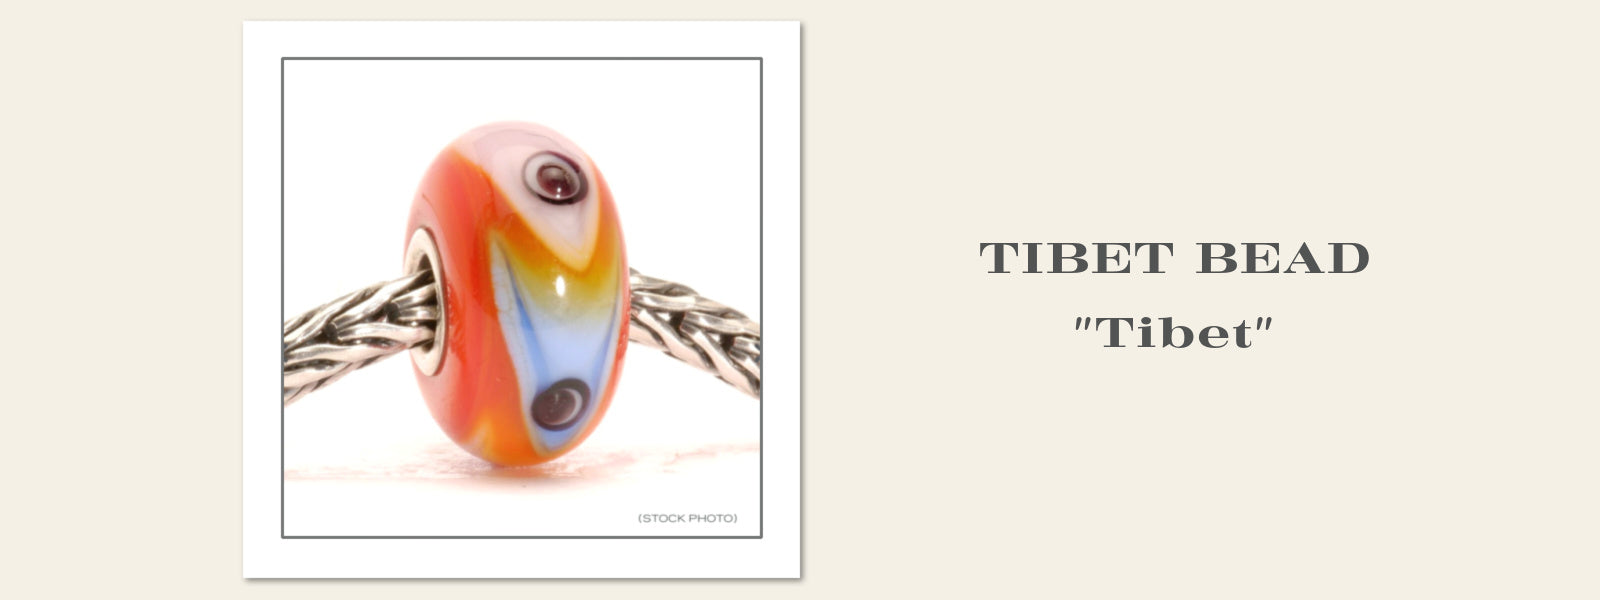 The TIBET bead is part of the rare Trollbeads Tibet Collection which is available at Suzie Q Studio.​​